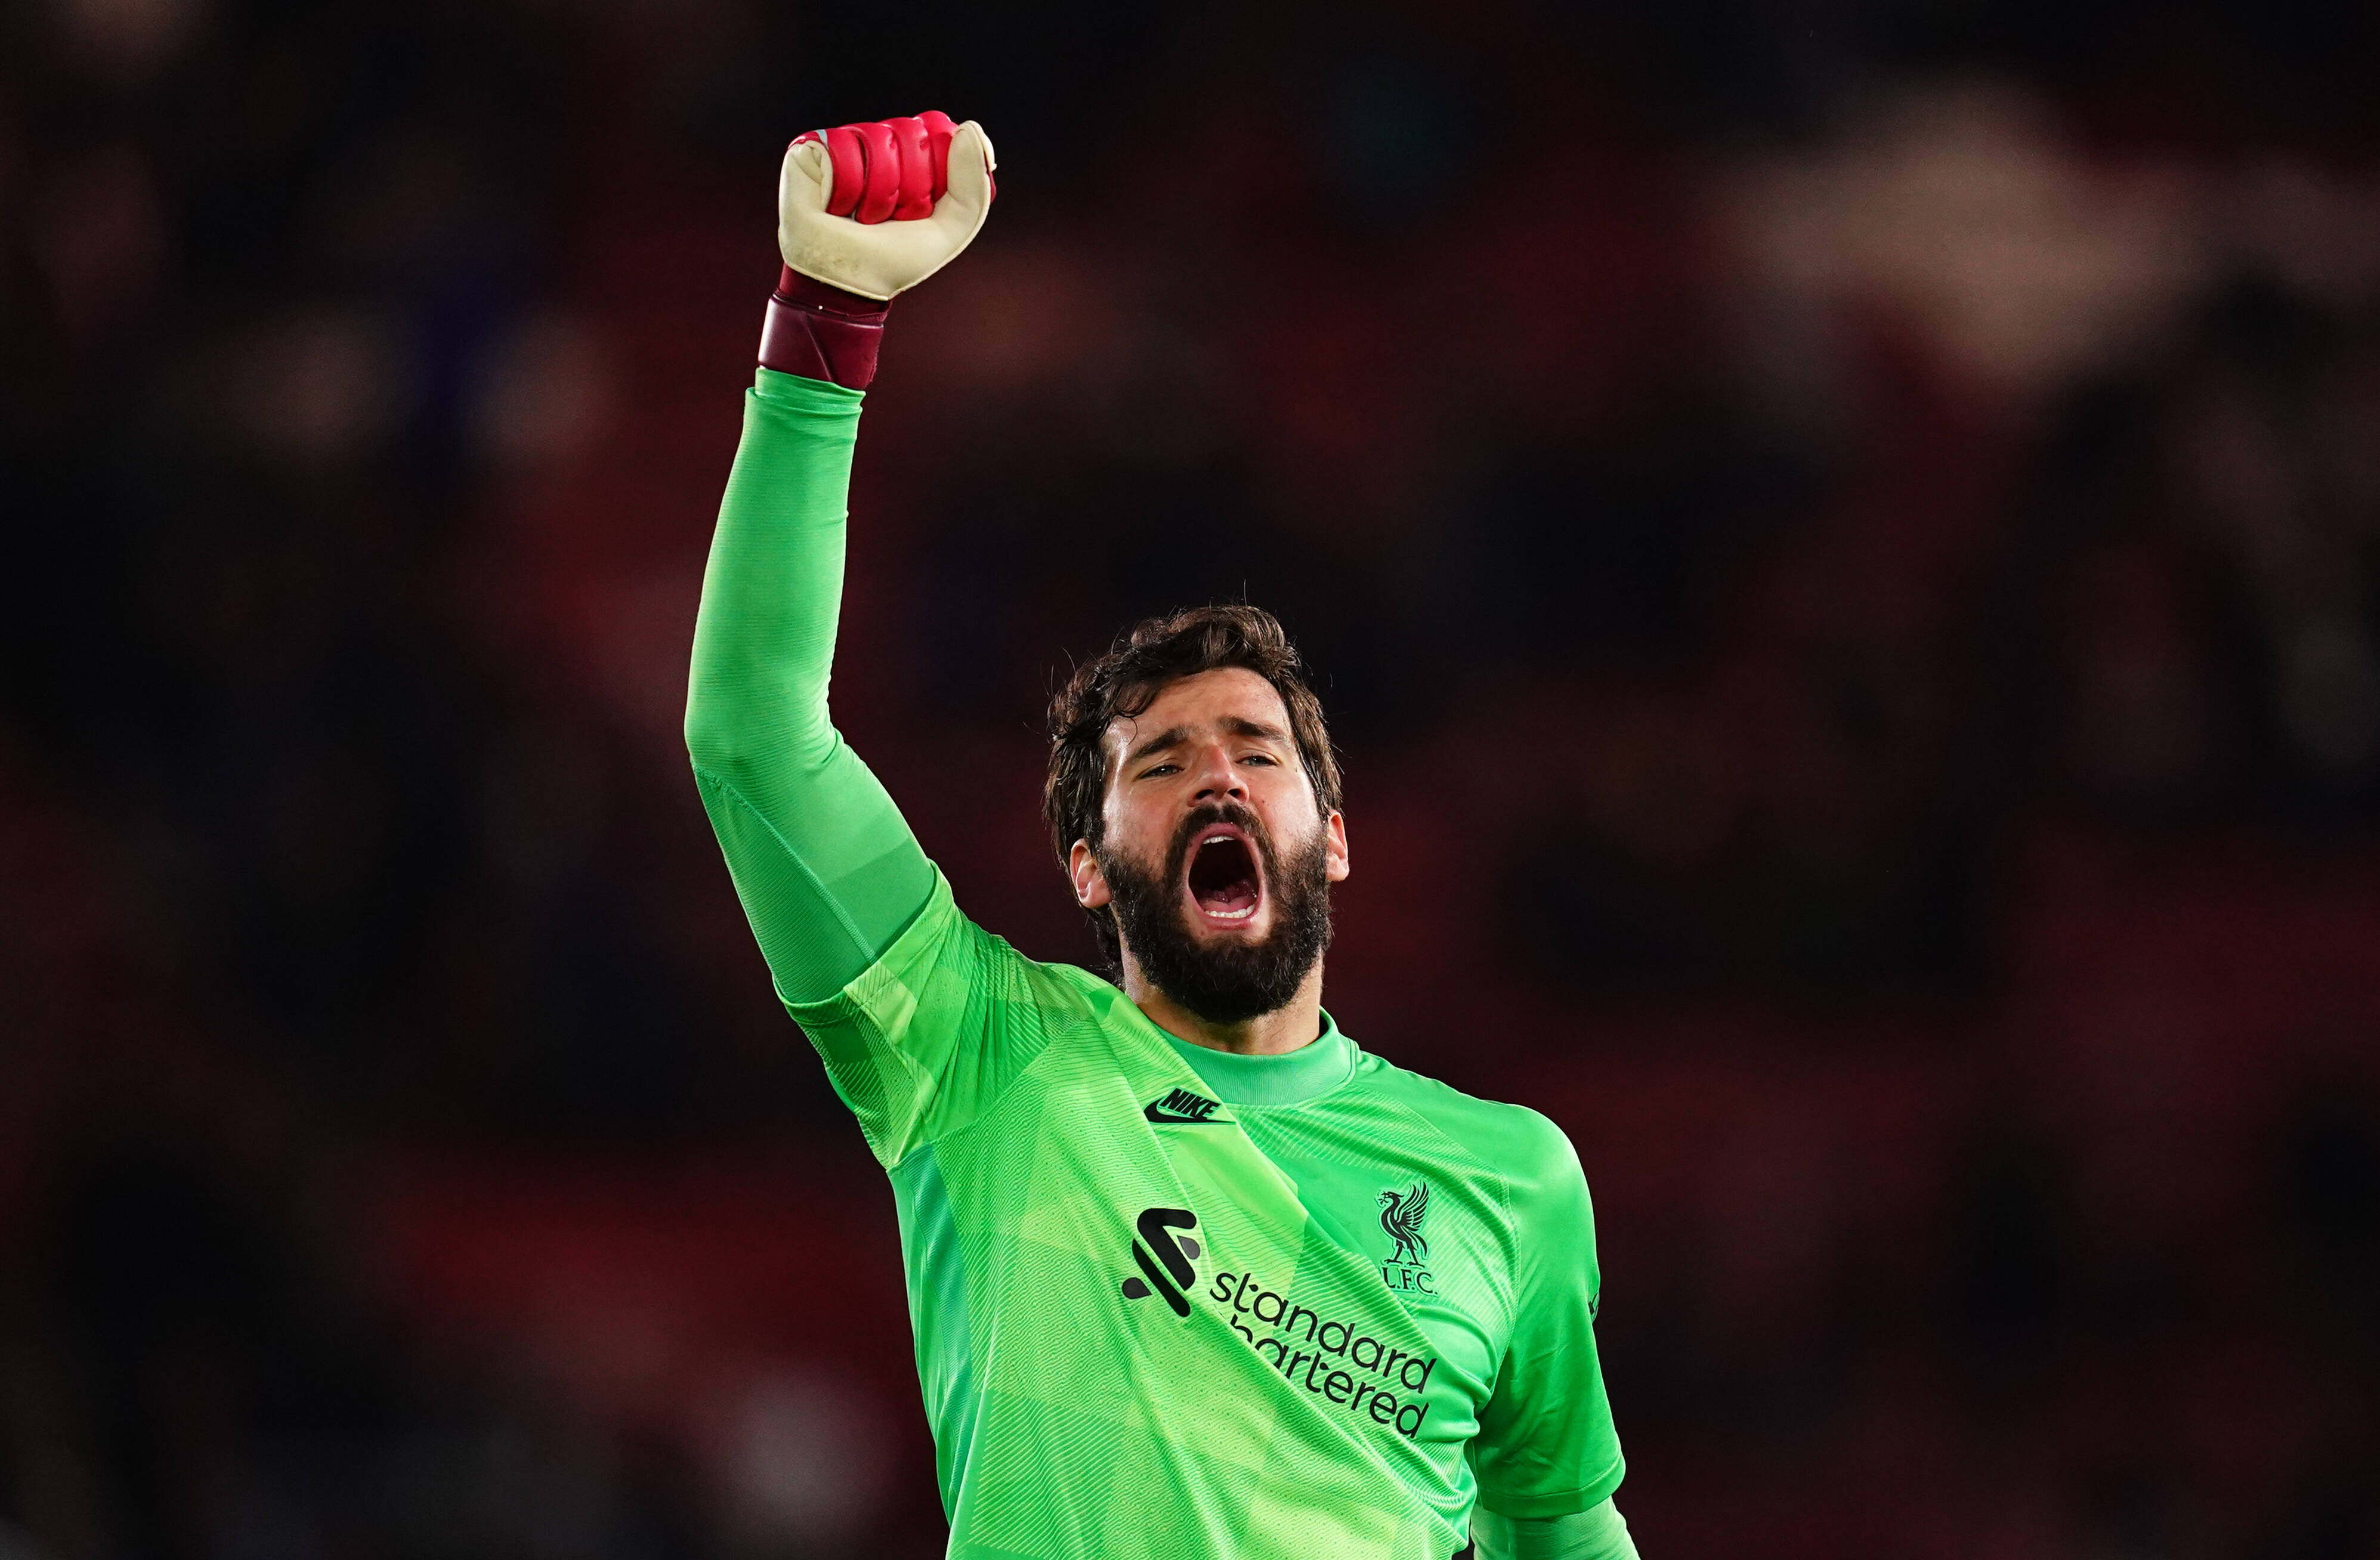 Alisson denied Nathan Redmond late in the game with a good save